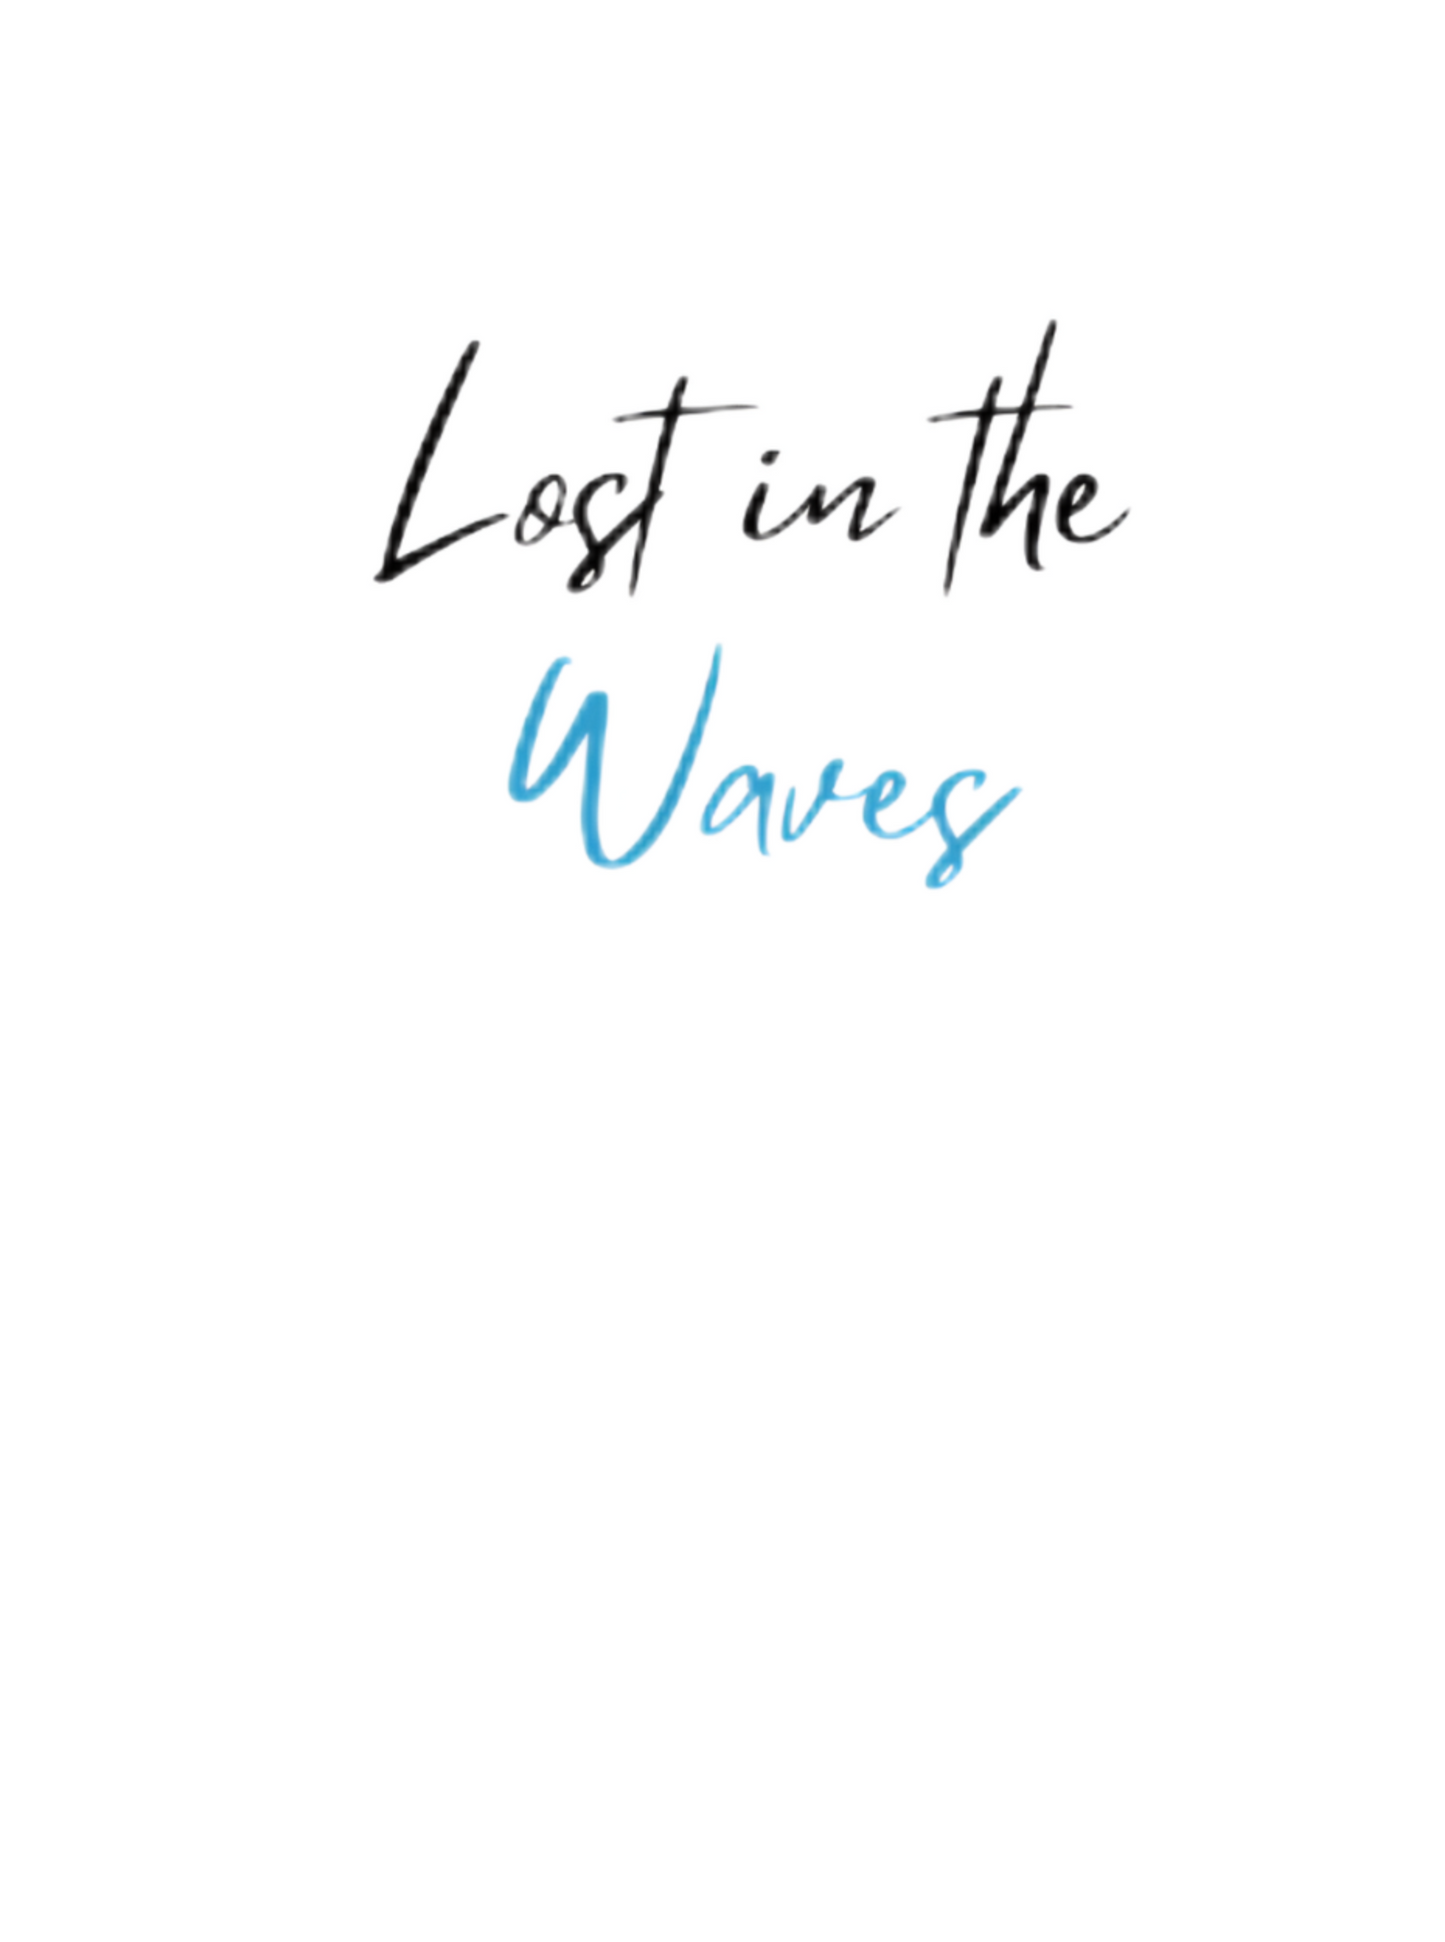 Lost in the waves - Oversize